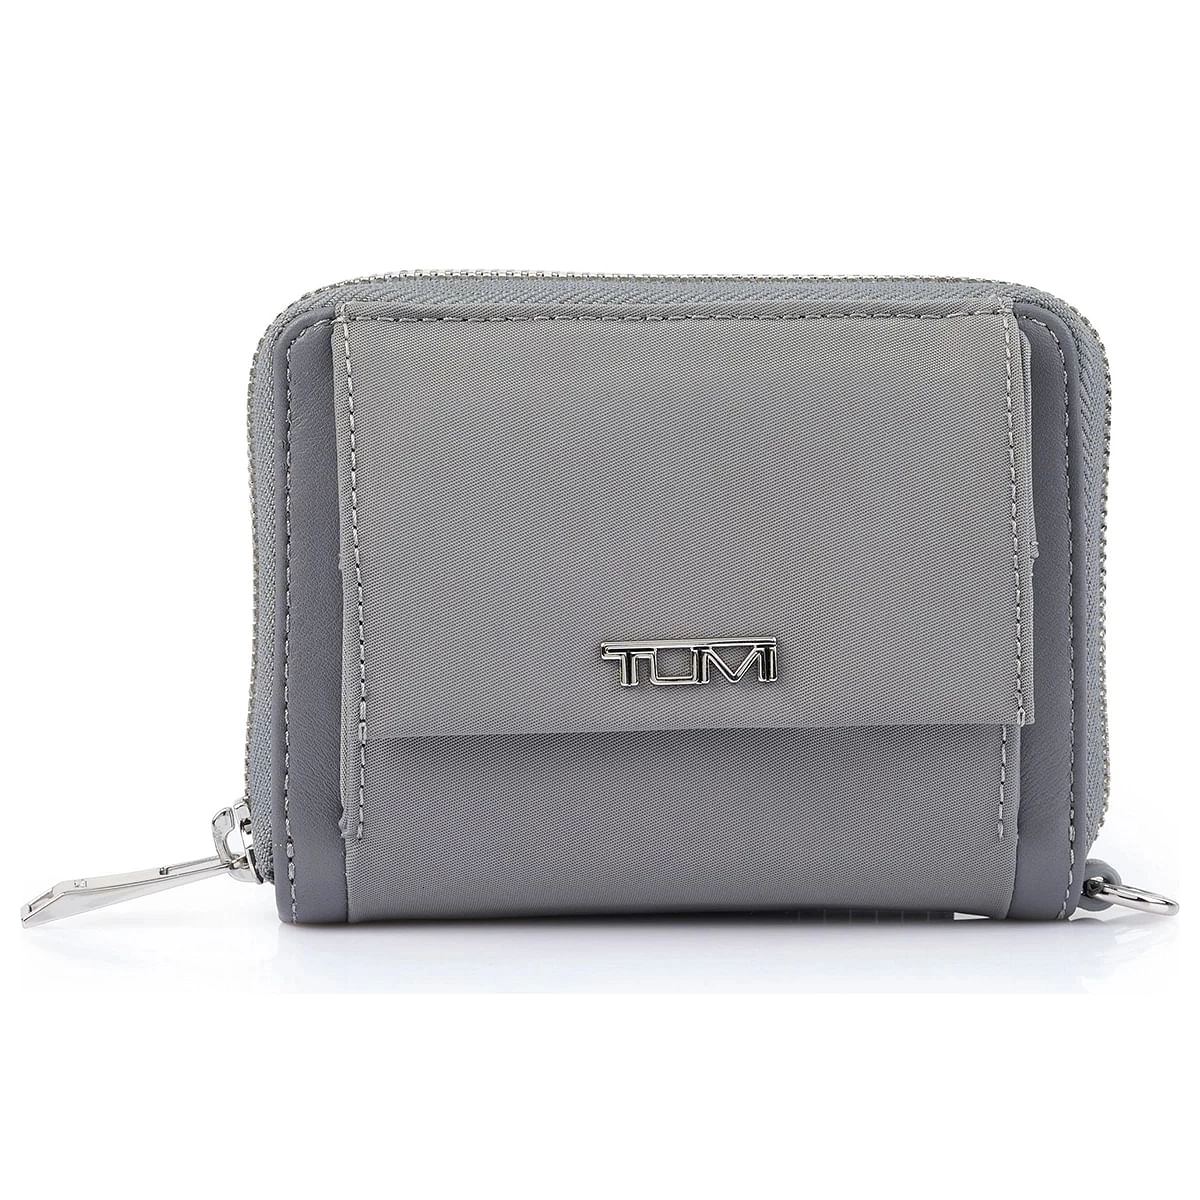 DKNY Women's Wallets - Bags | Stylicy USA